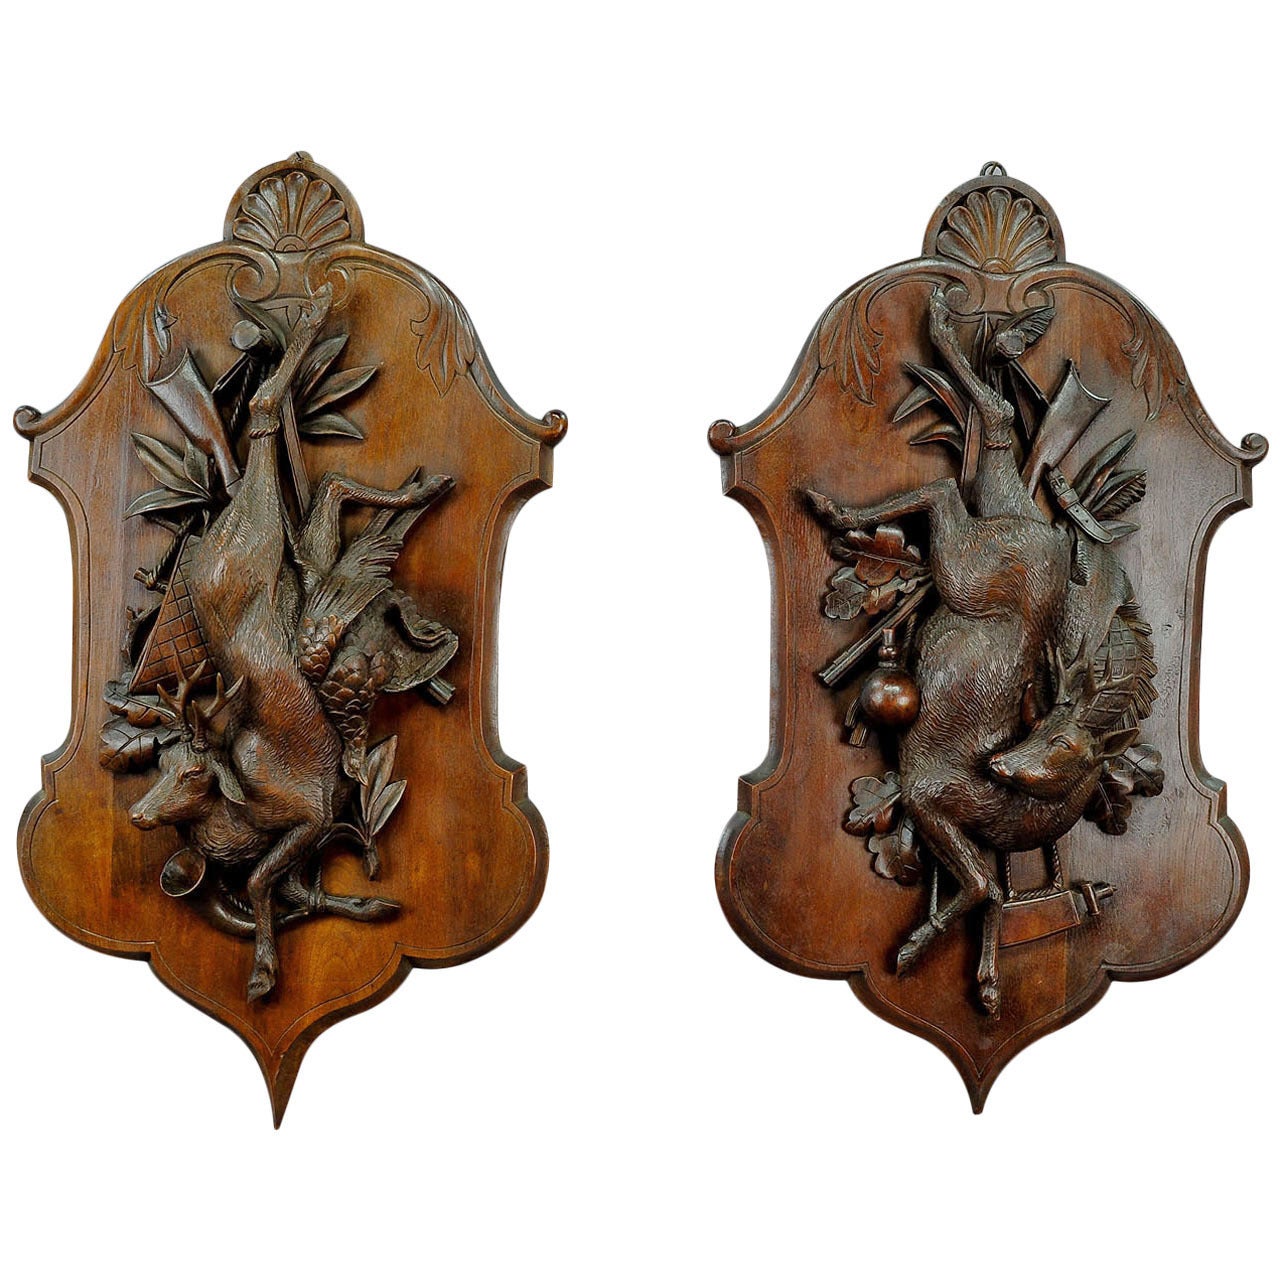 Pair of Antique Black Forest Carved Wood Game Plaques of a Deer and Pheasant